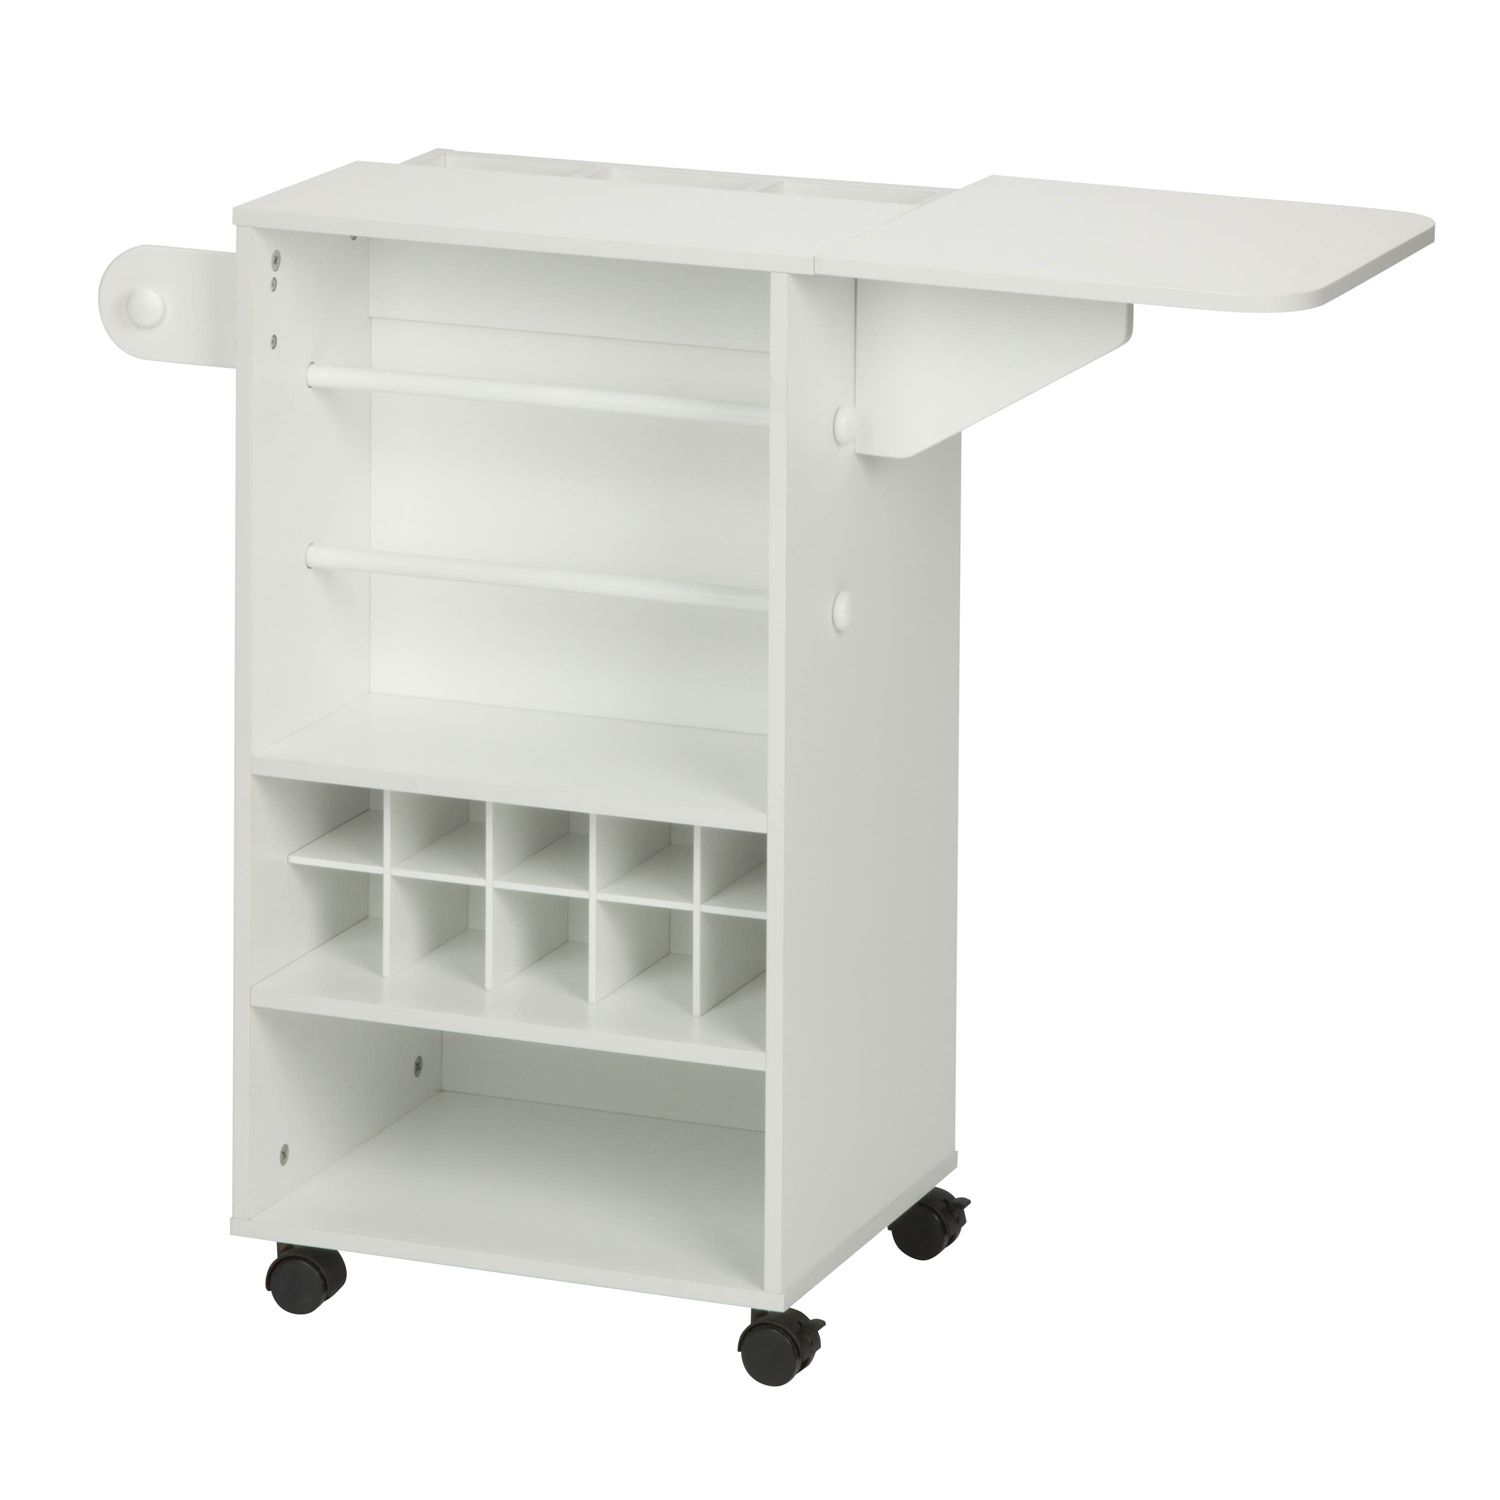 Image for Honey-Can-Do Storage Cart at Kohl's.